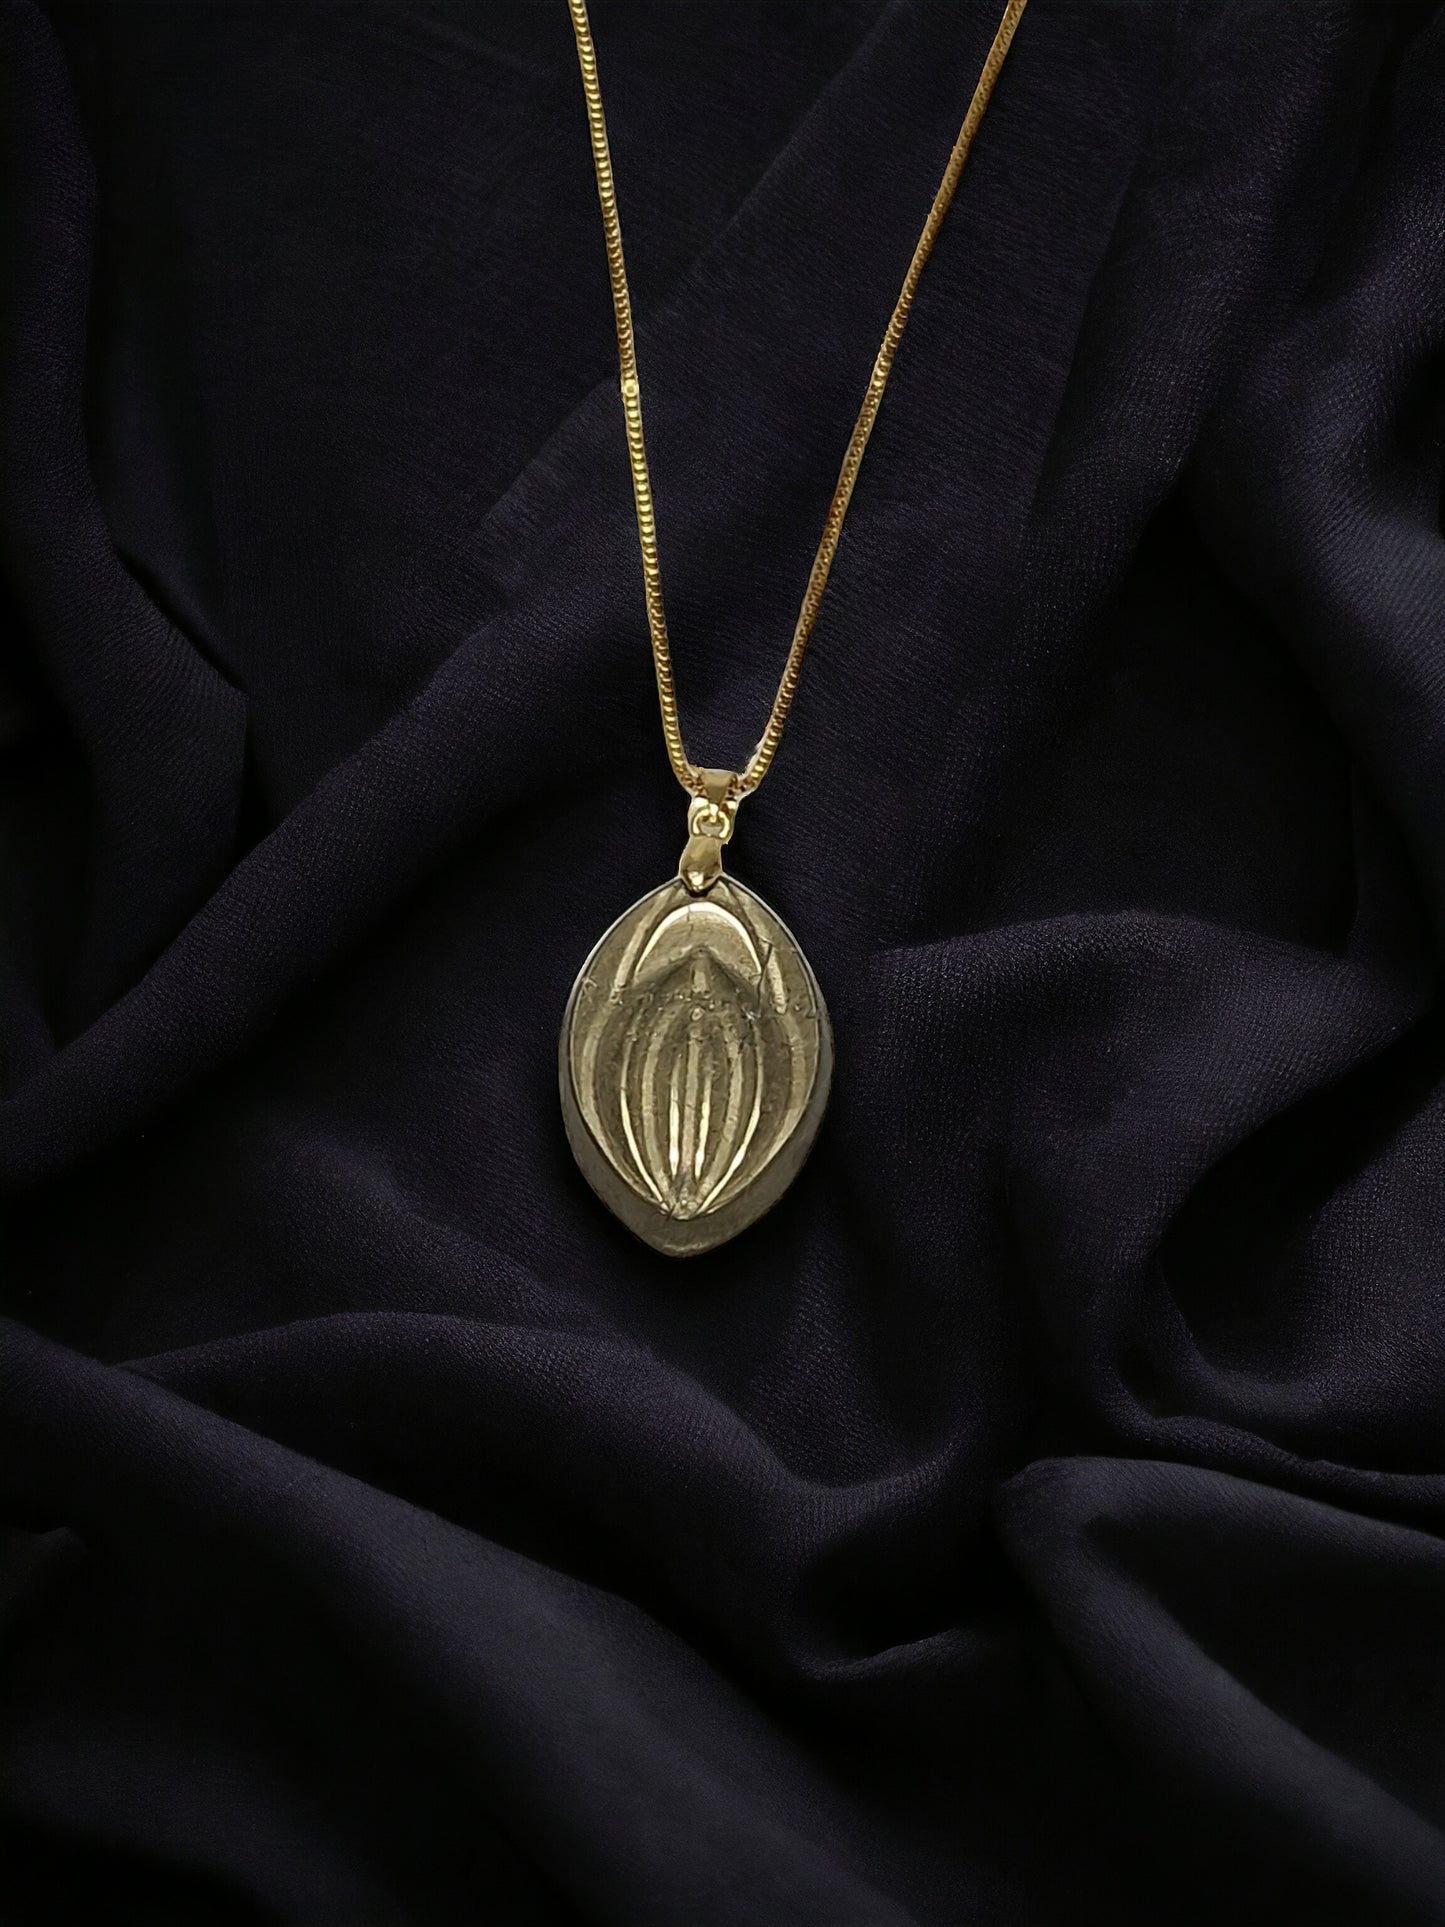 A beautiful necklace with a crystal of the stone pyrite, shaped like a vagina or fifi